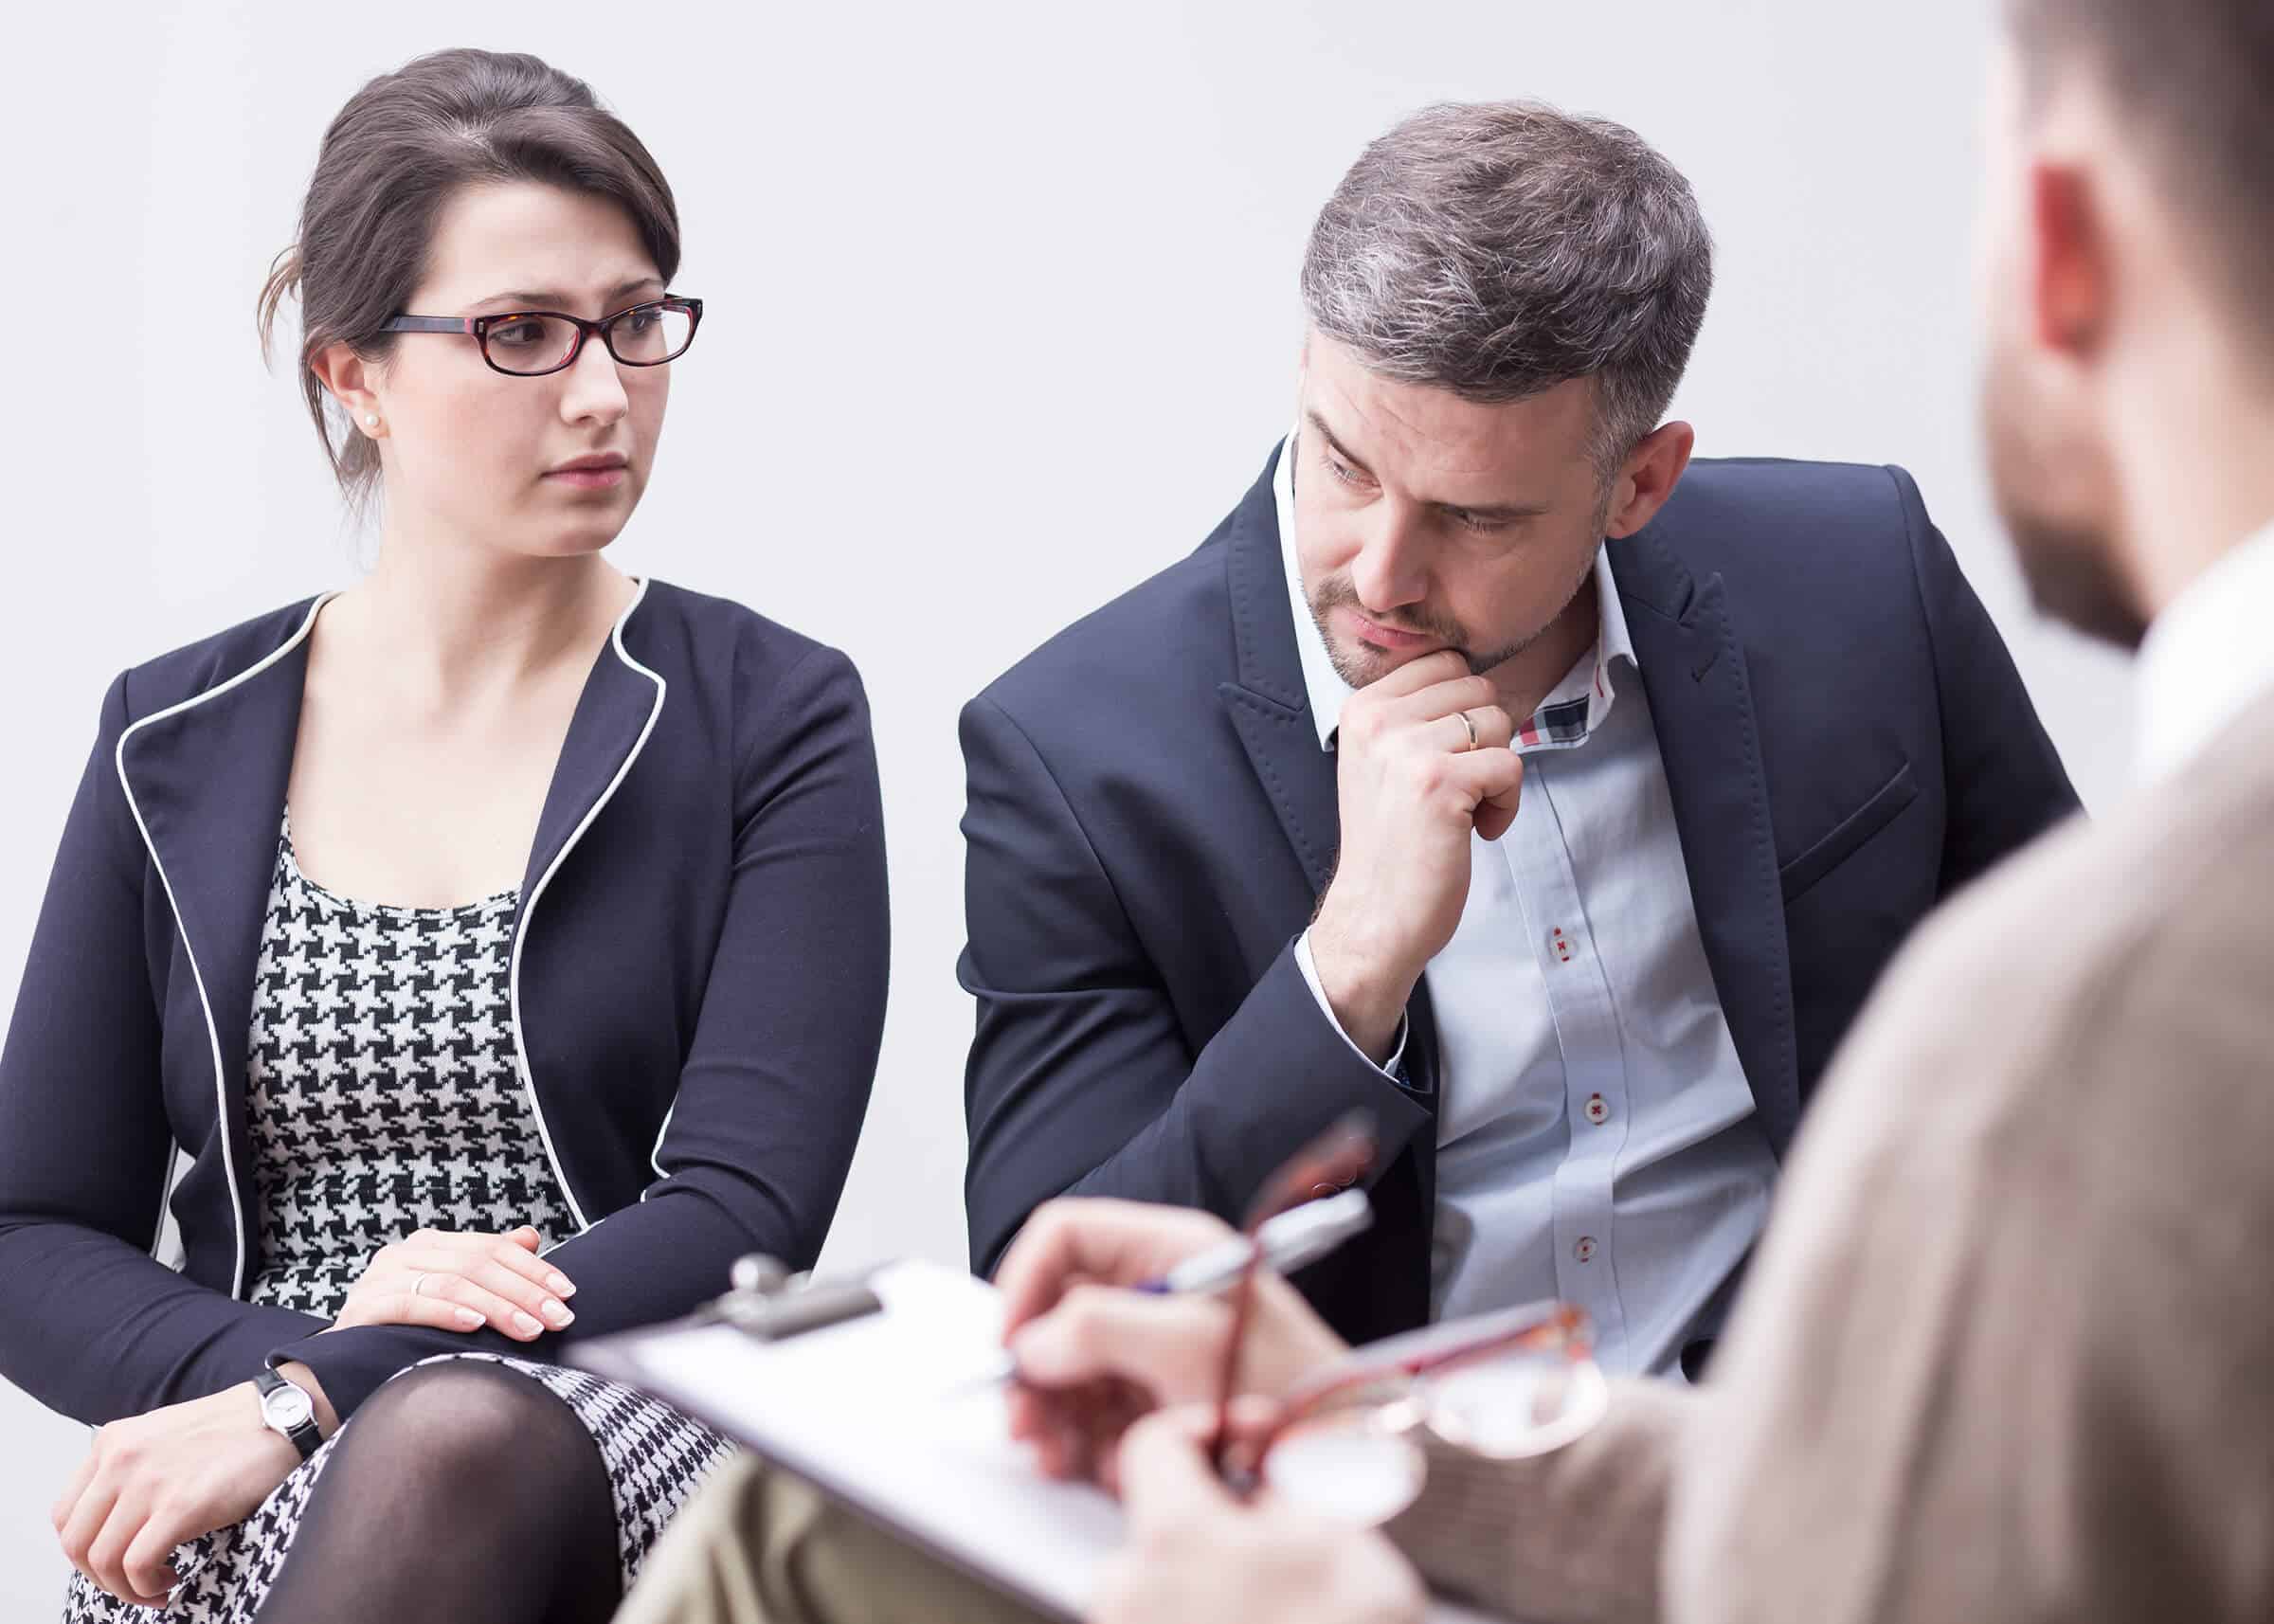 A man and woman in a meeting room with a man in glasses. They are engaged in a divorce mediation session.